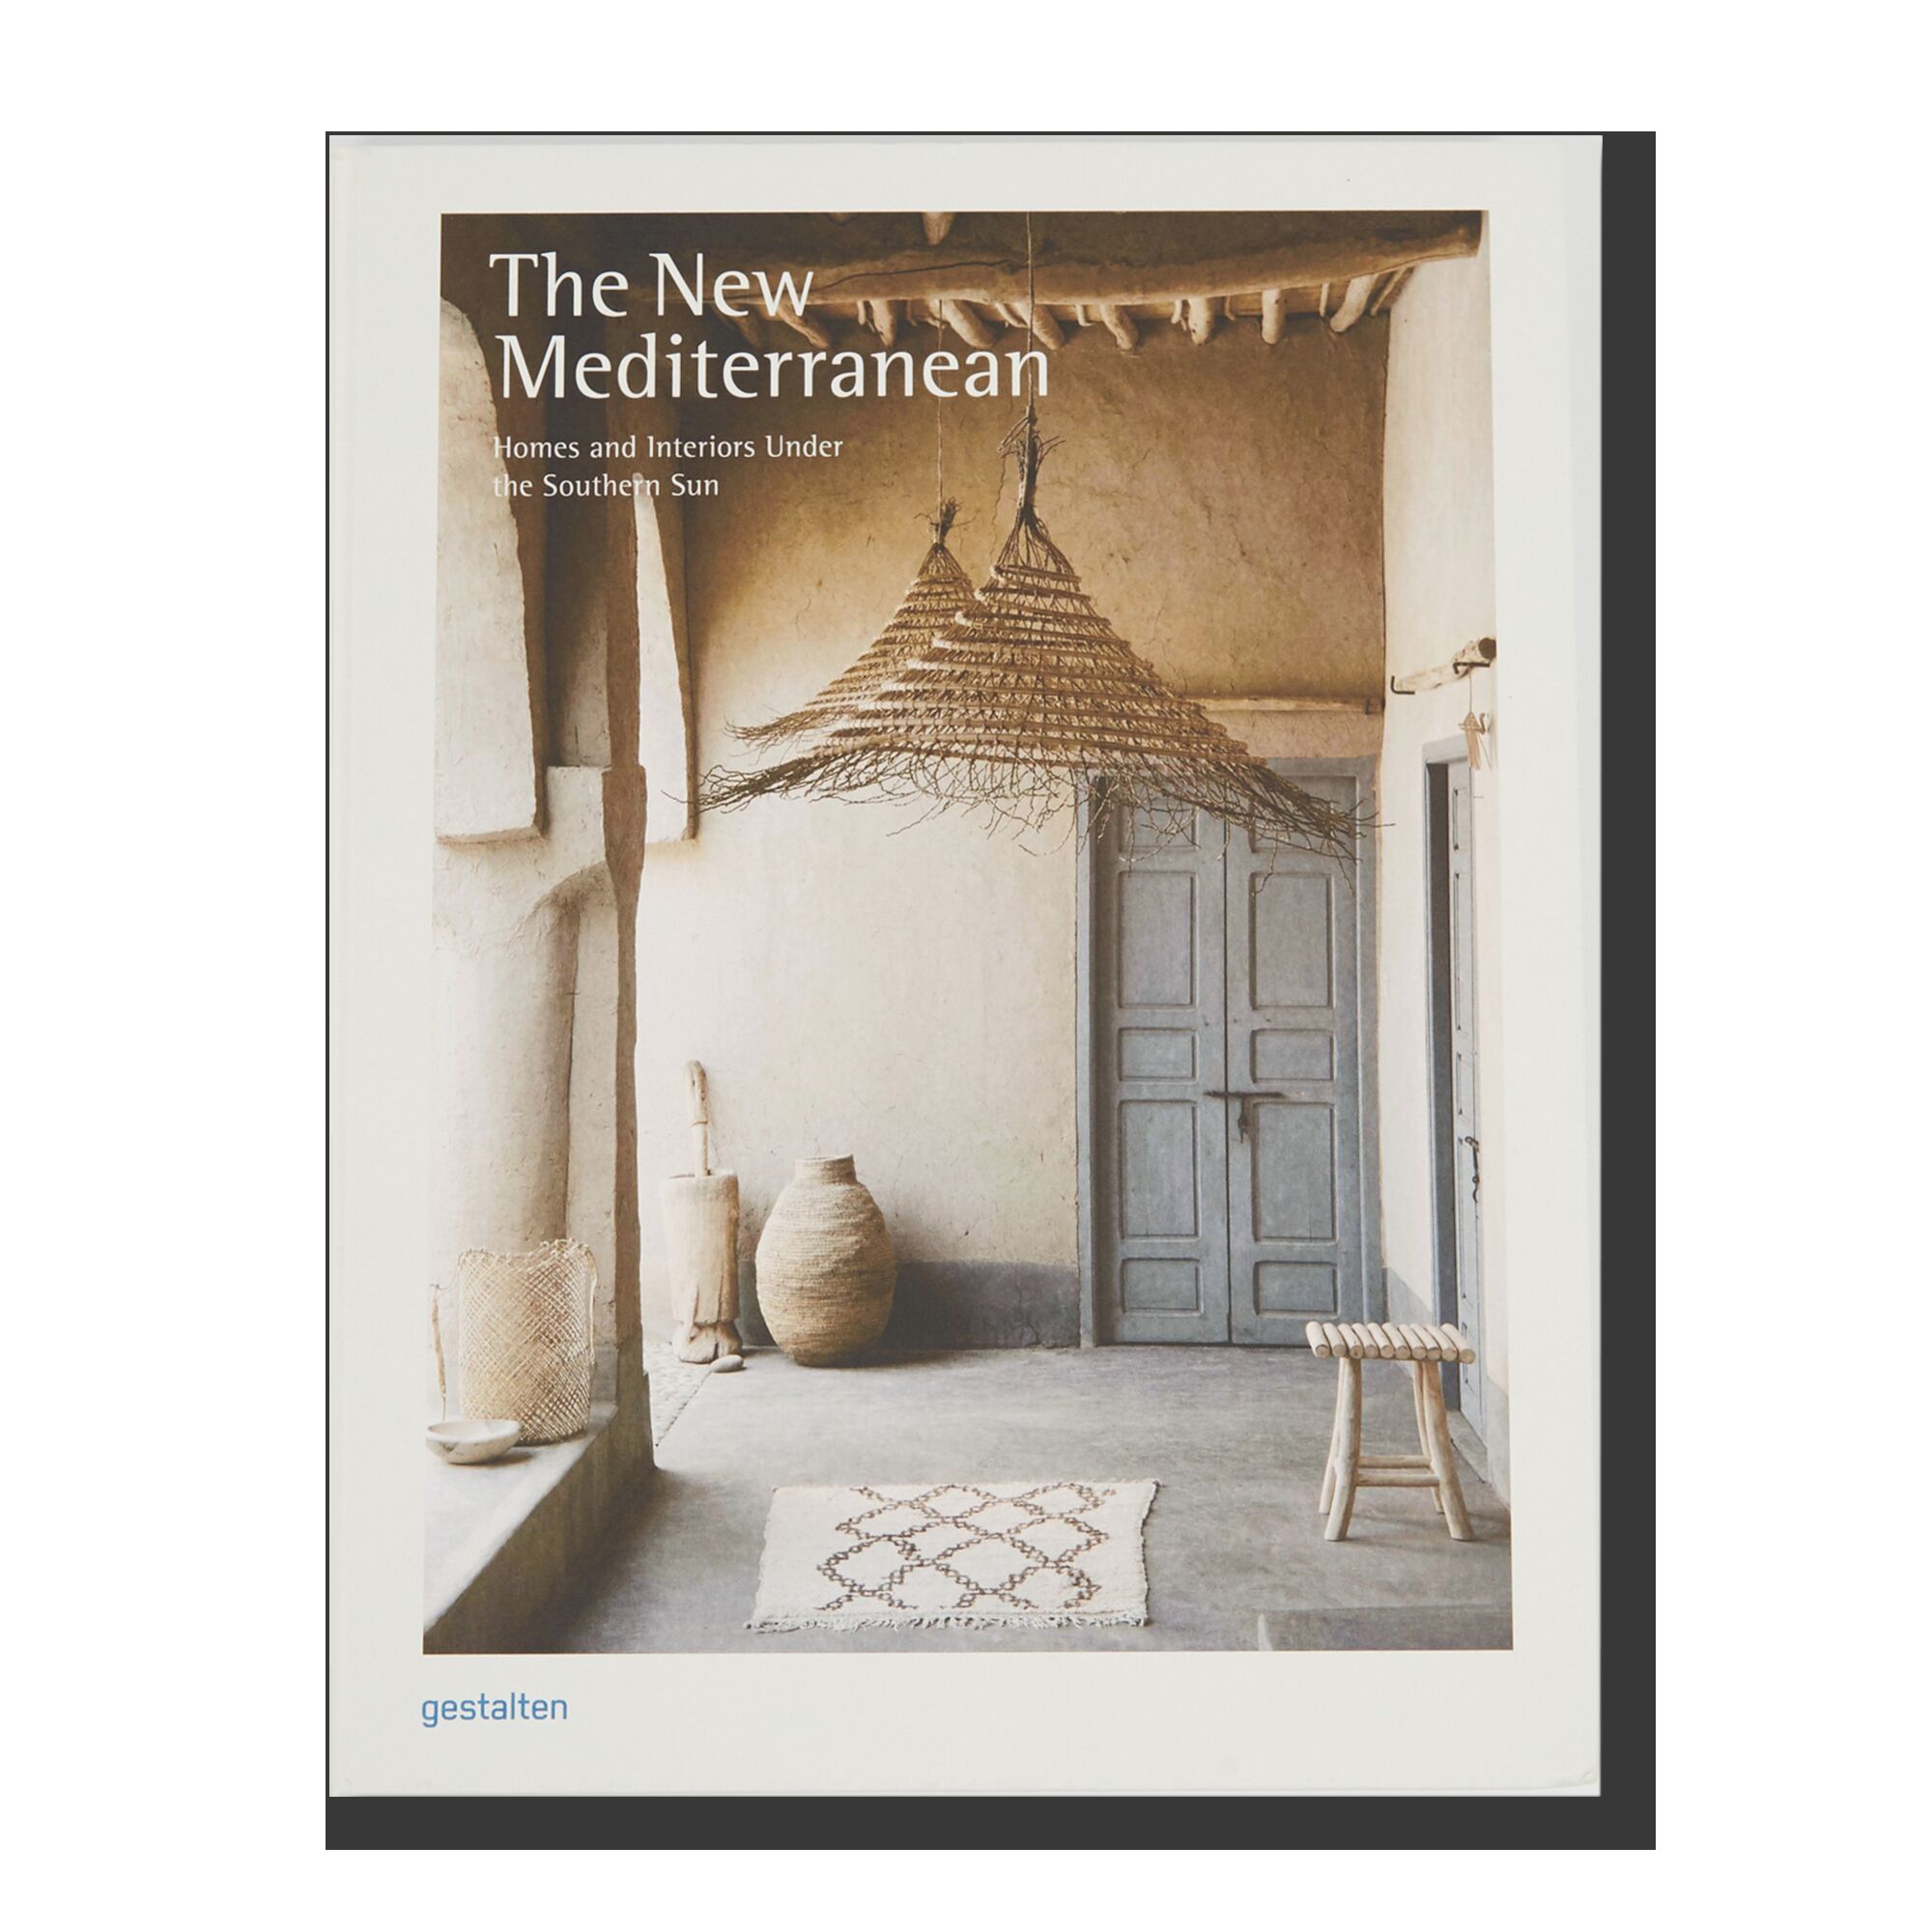 The New Mediterranean: Homes and Interiors under the Southern Sun